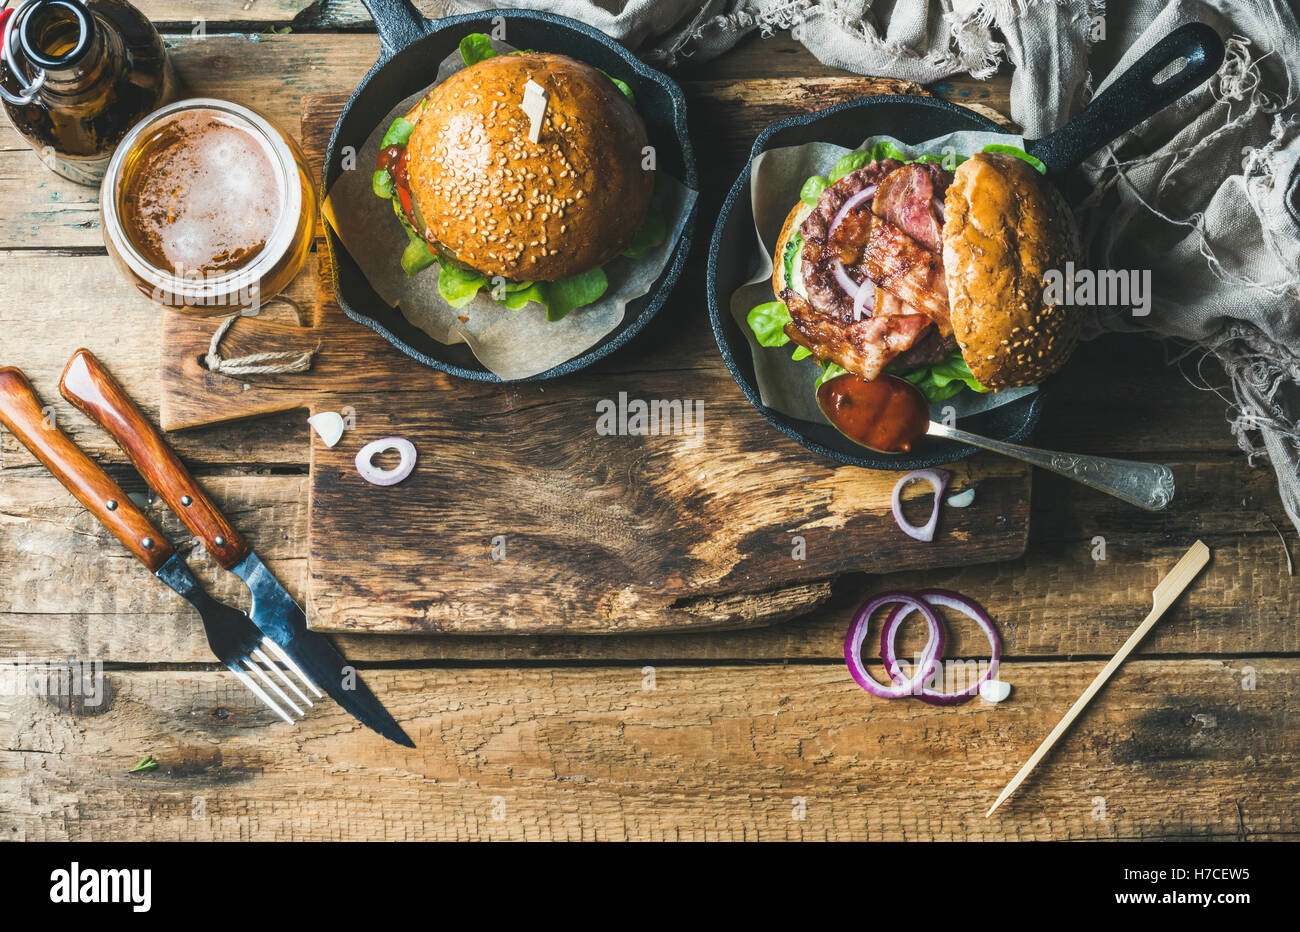 Homemade beef burgers with crispy bacon and vegetables in small pans and glass of wheat beer on rustic serving board over shabby Stock Photo